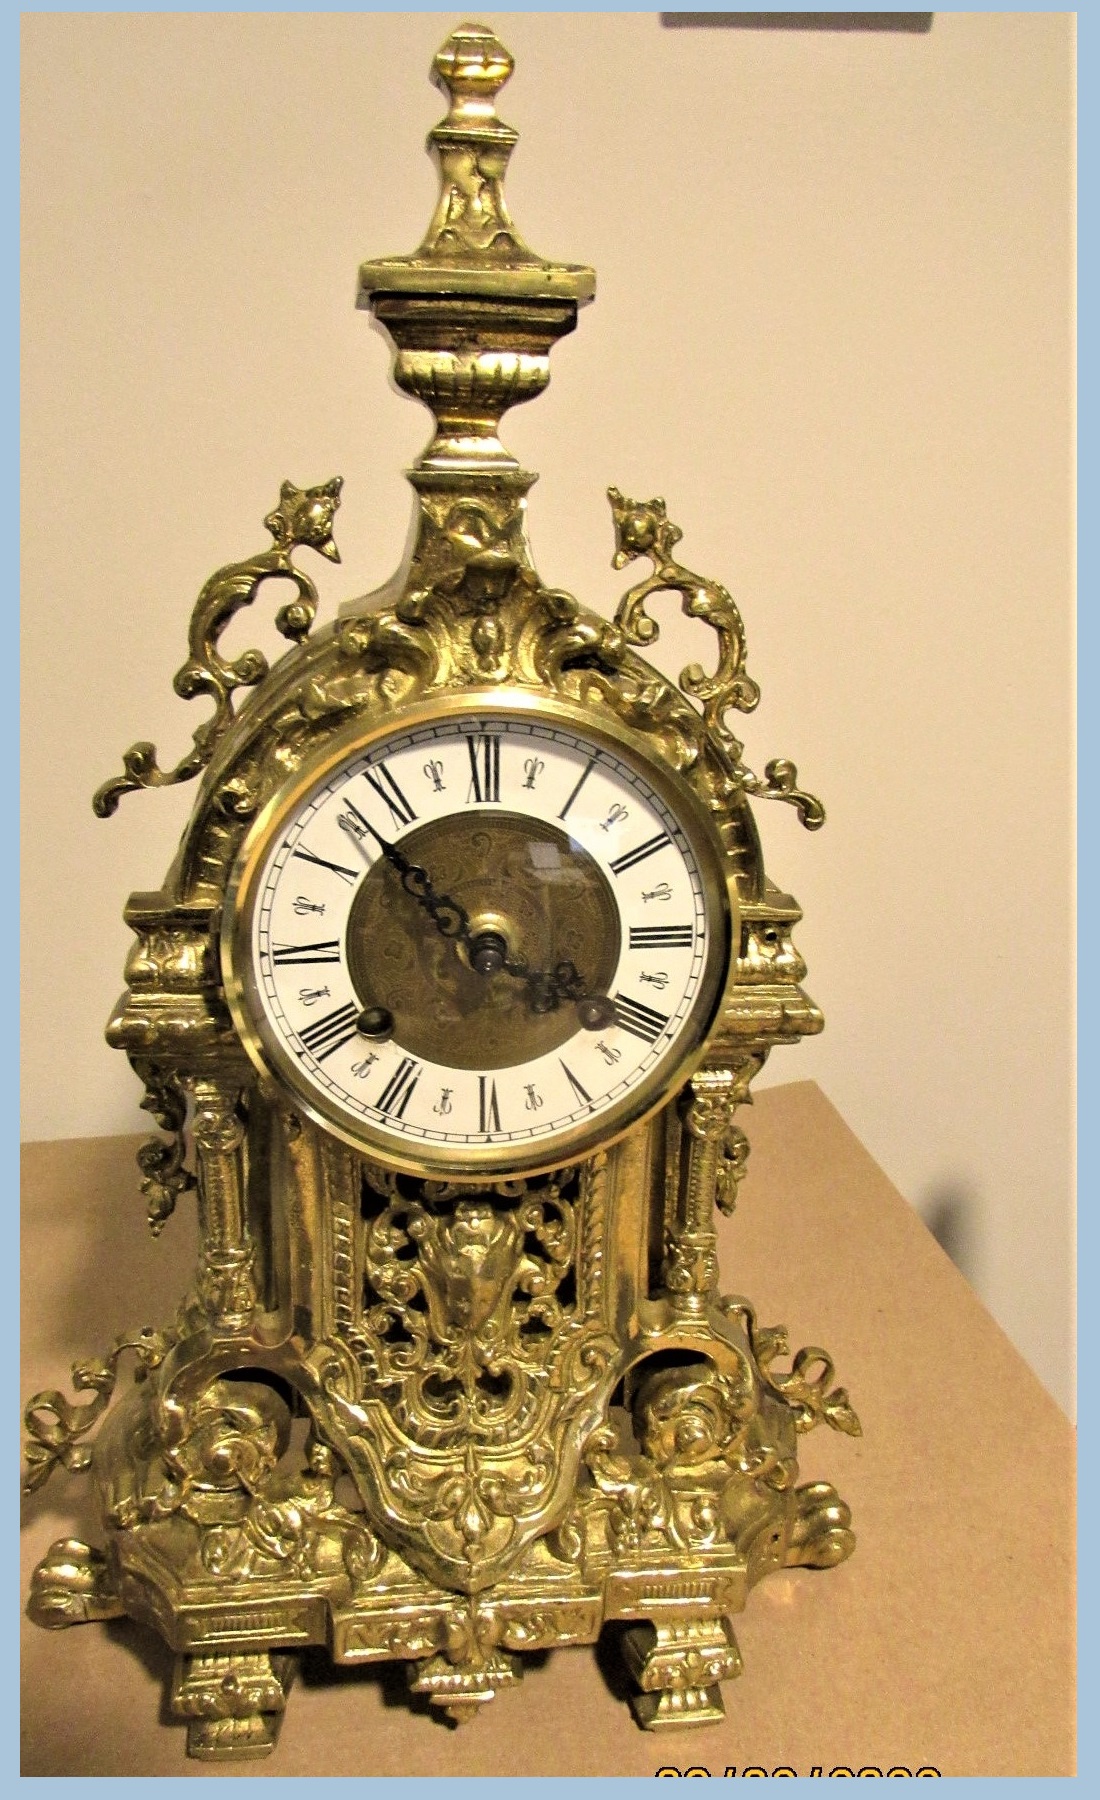 Antique Functional Playing Clock | Ouslet Auction